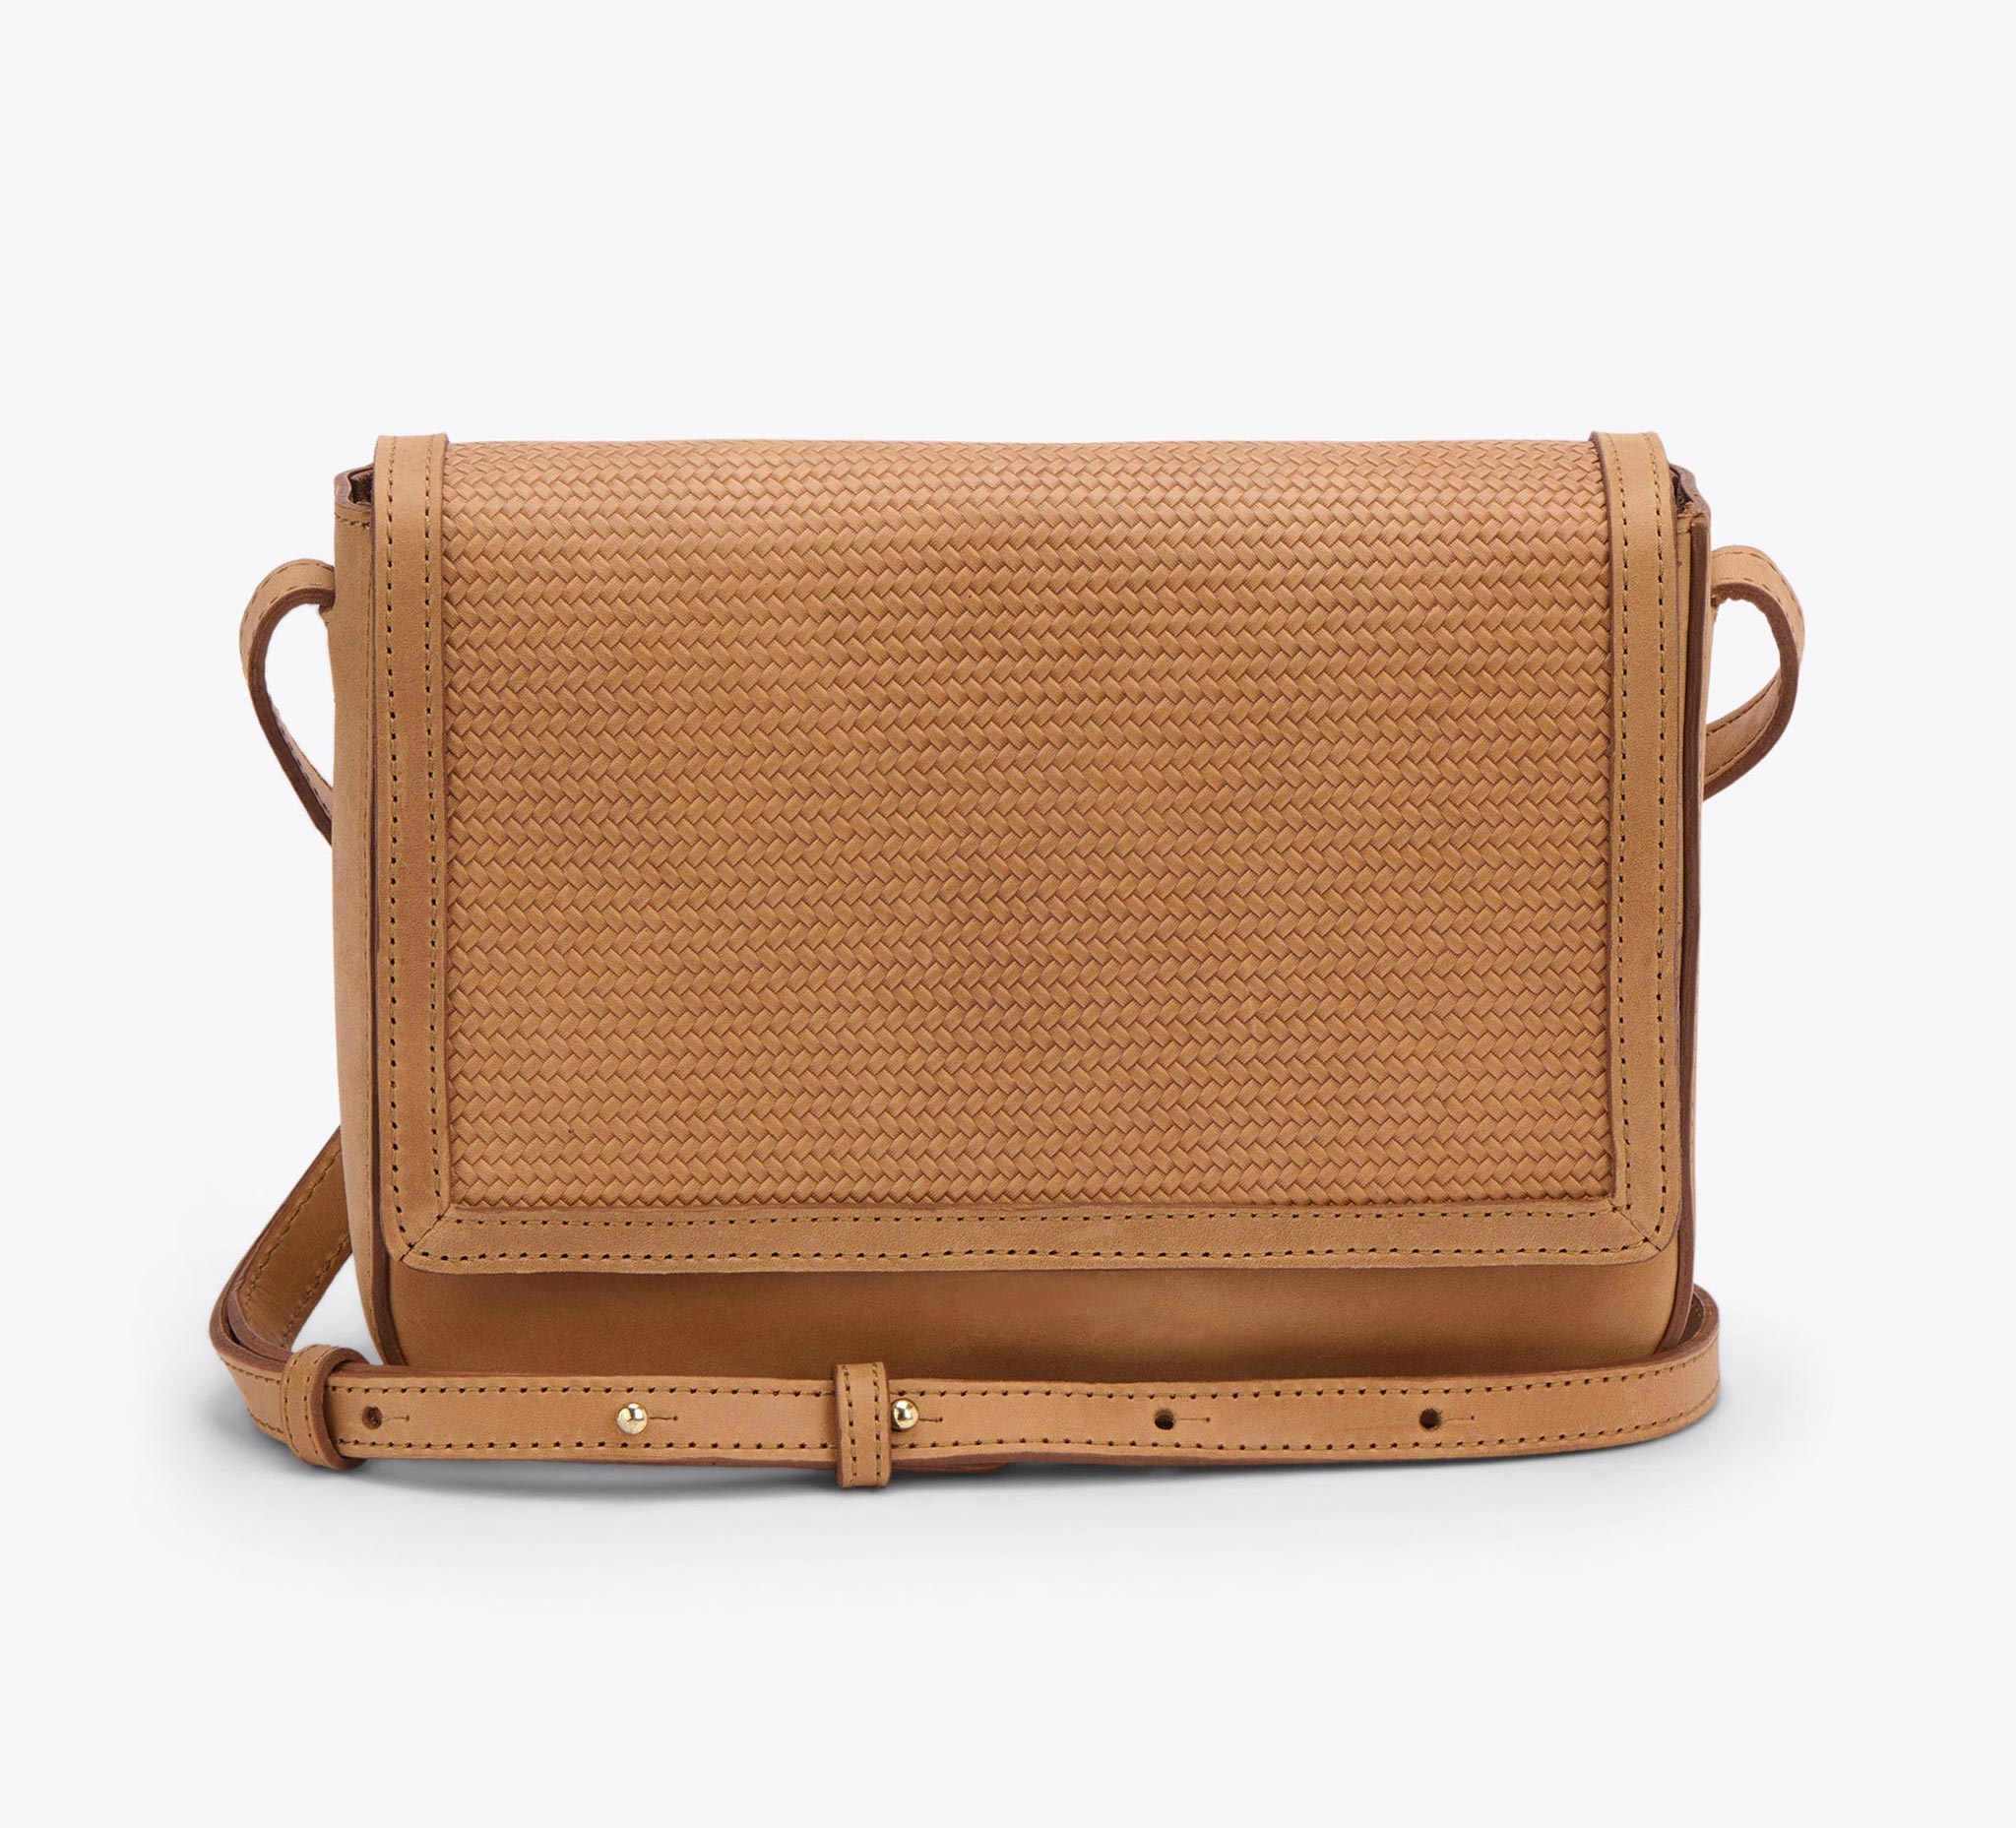 Nisolo Clara Crossbody Almond - Every Nisolo product is built on the foundation of comfort, function, and design. 